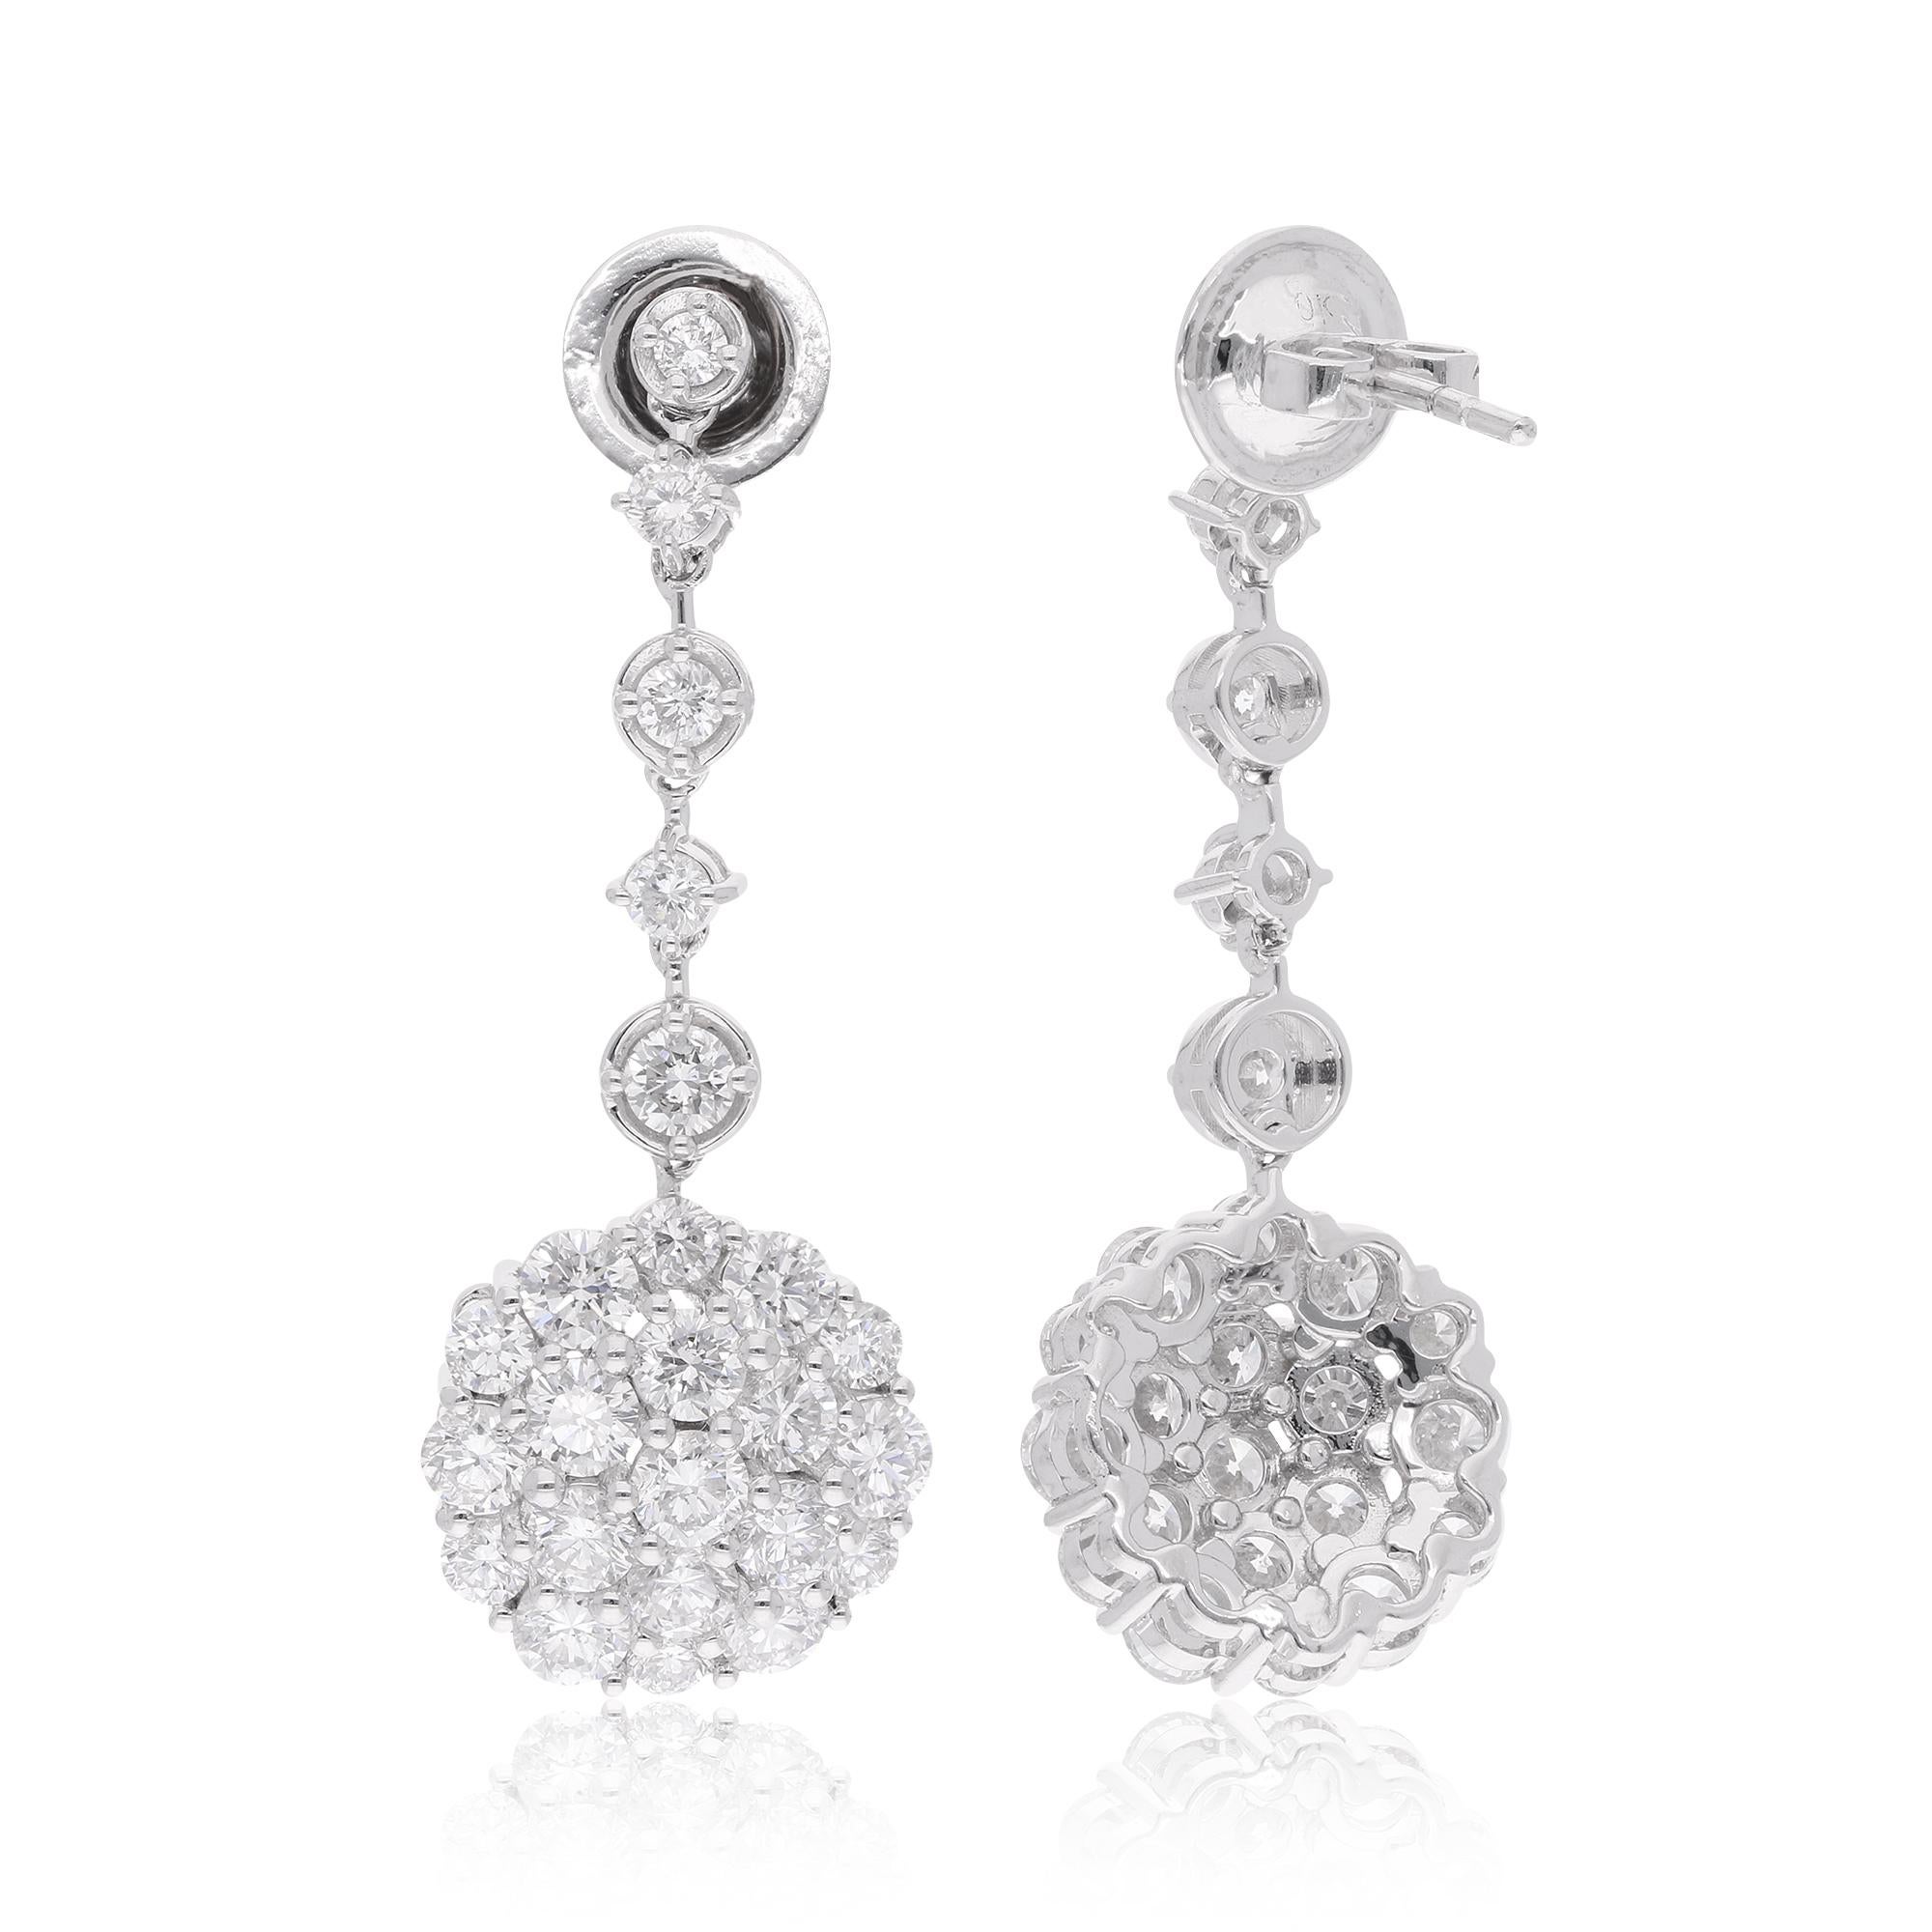 These exquisite dangle earrings are a testament to fine craftsmanship and timeless elegance. They boast a total carat weight of 3.99 carats of diamonds, creating a captivating and luxurious display of brilliance.

Item Code :- STE-1267B
Gross Wt. :-